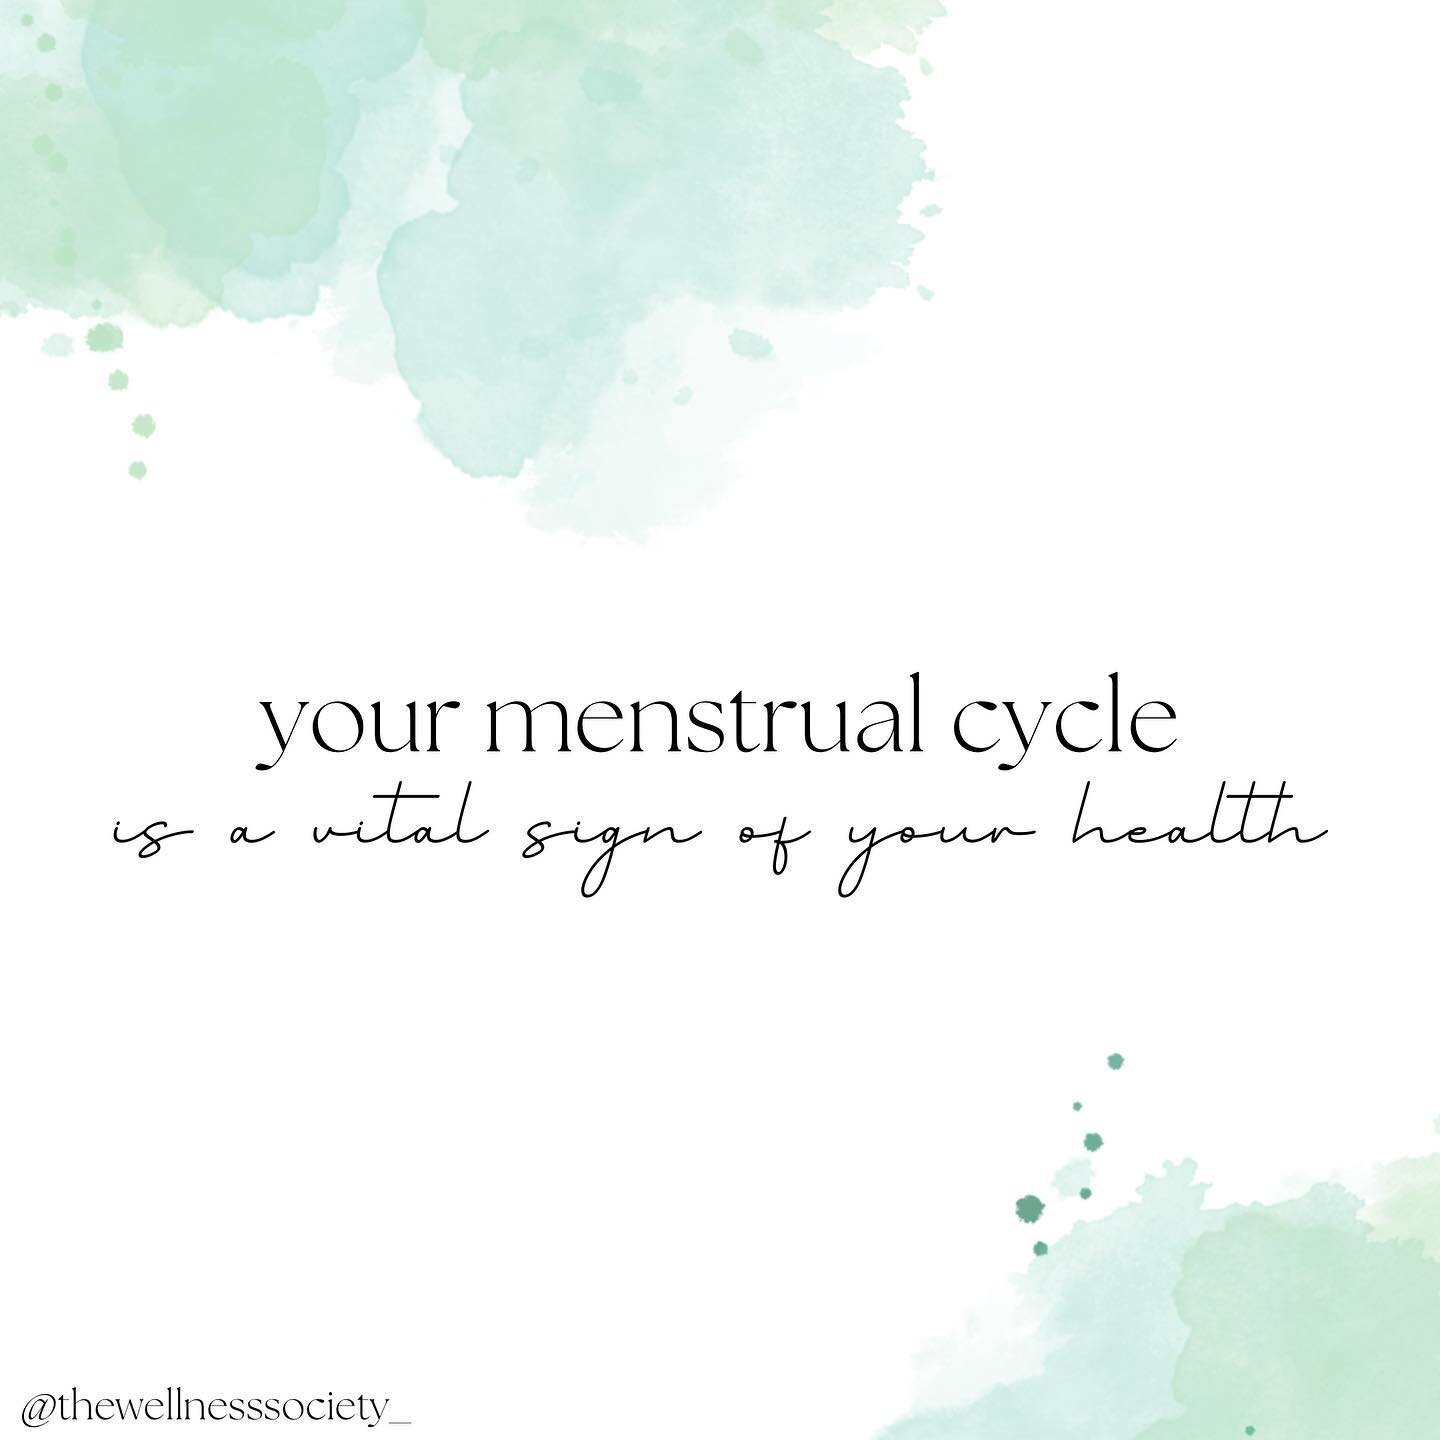 Your menstrual cycle is a vital sign when it comes to assessing your overall health⚠️

Both the American Academy of Pediatrics and American College of Obstetricians and Gynecologists even say so🤓

So what does this mean exactly?

Well, just like the